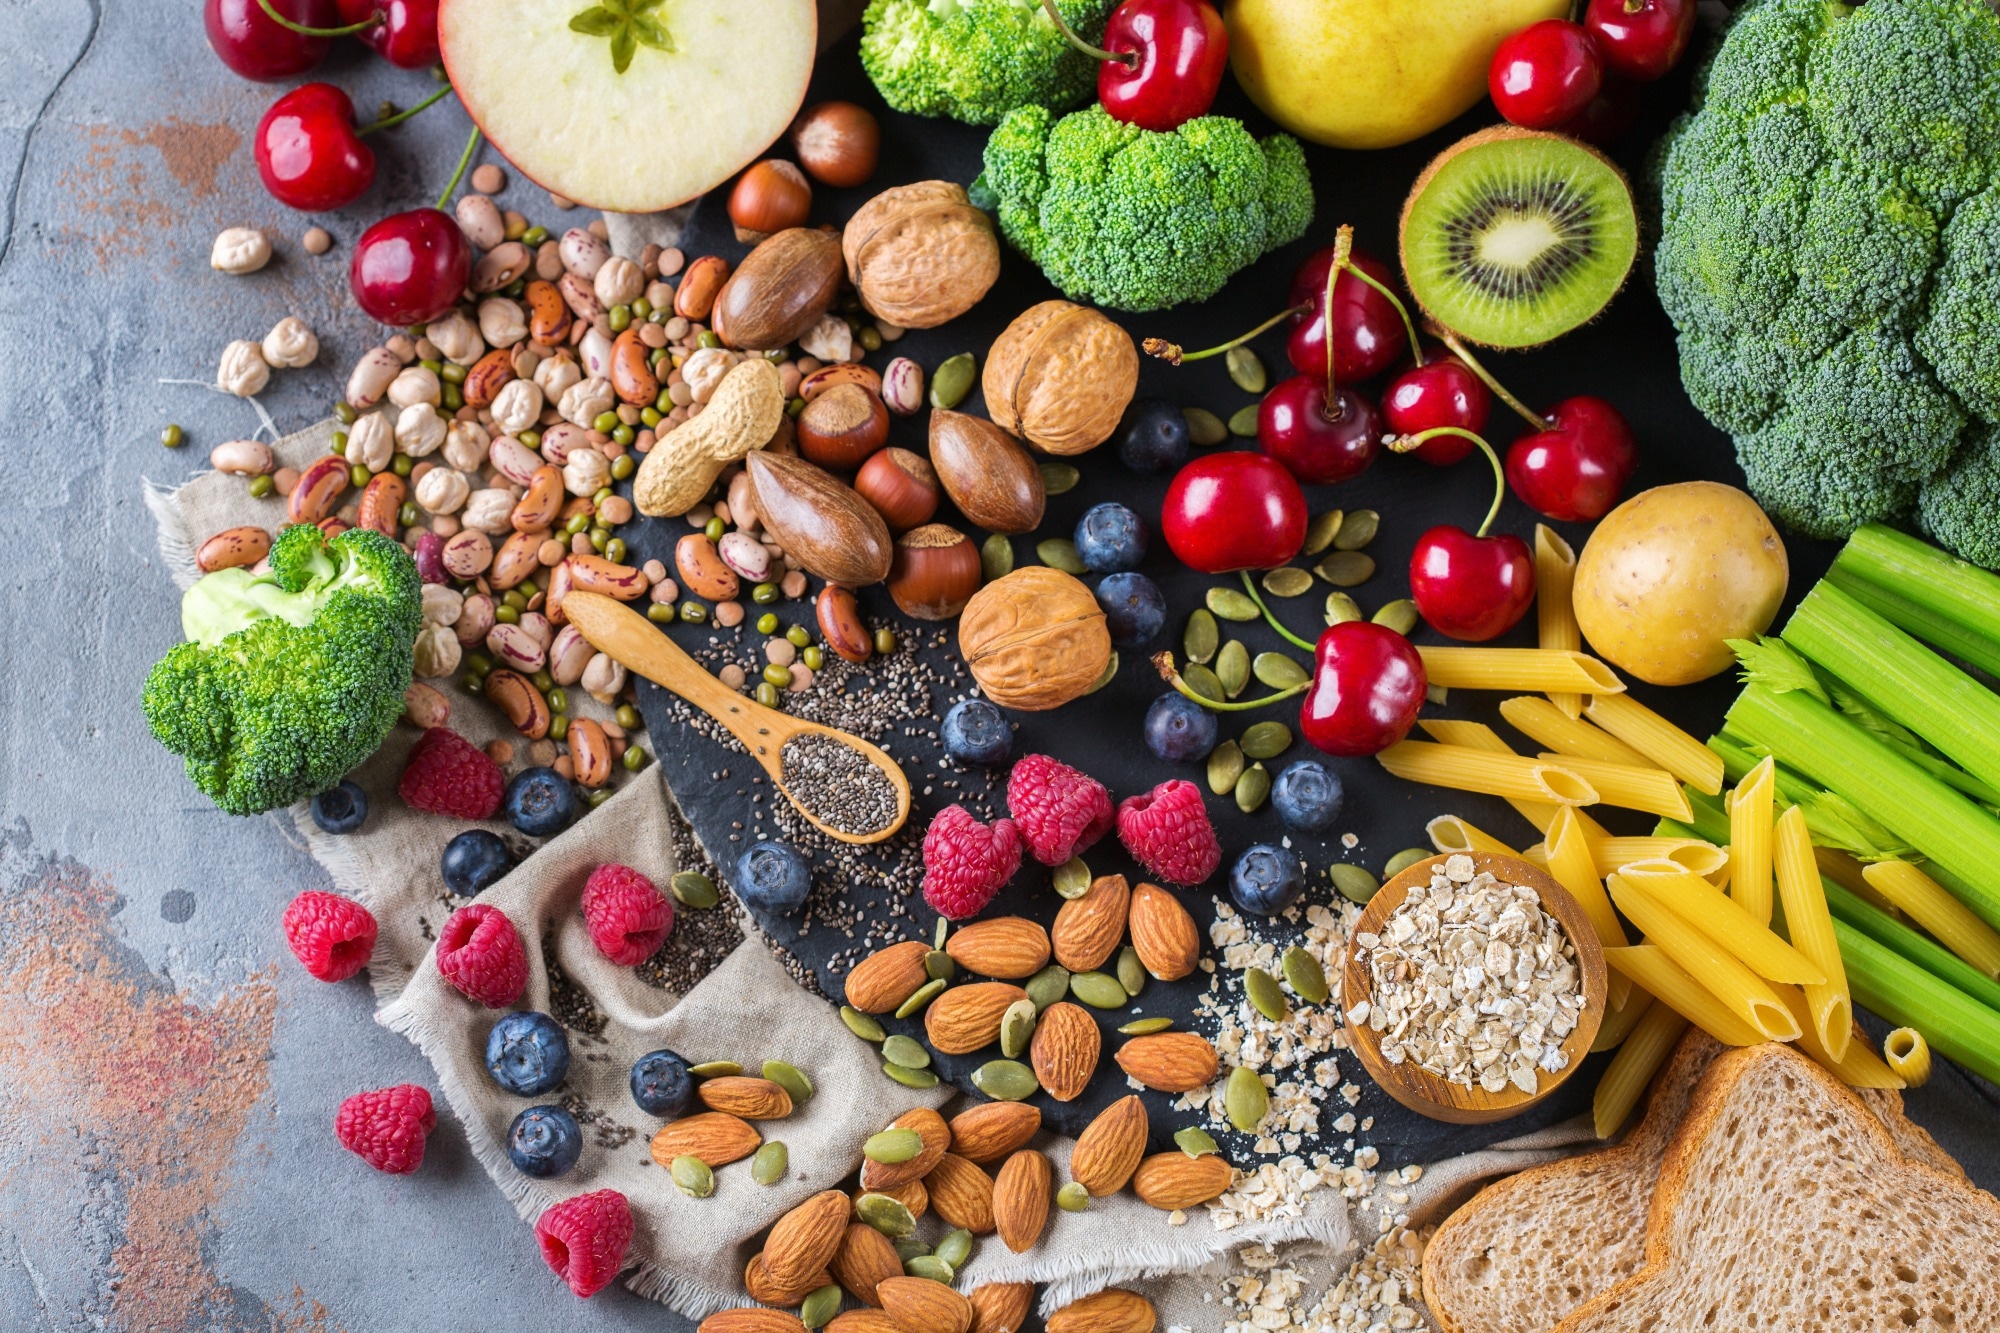 Study: The association between a vegetarian diet and varicose veins might be more prominent in men than in women. Image Credit: Antonina Vlasova / Shutterstock.com